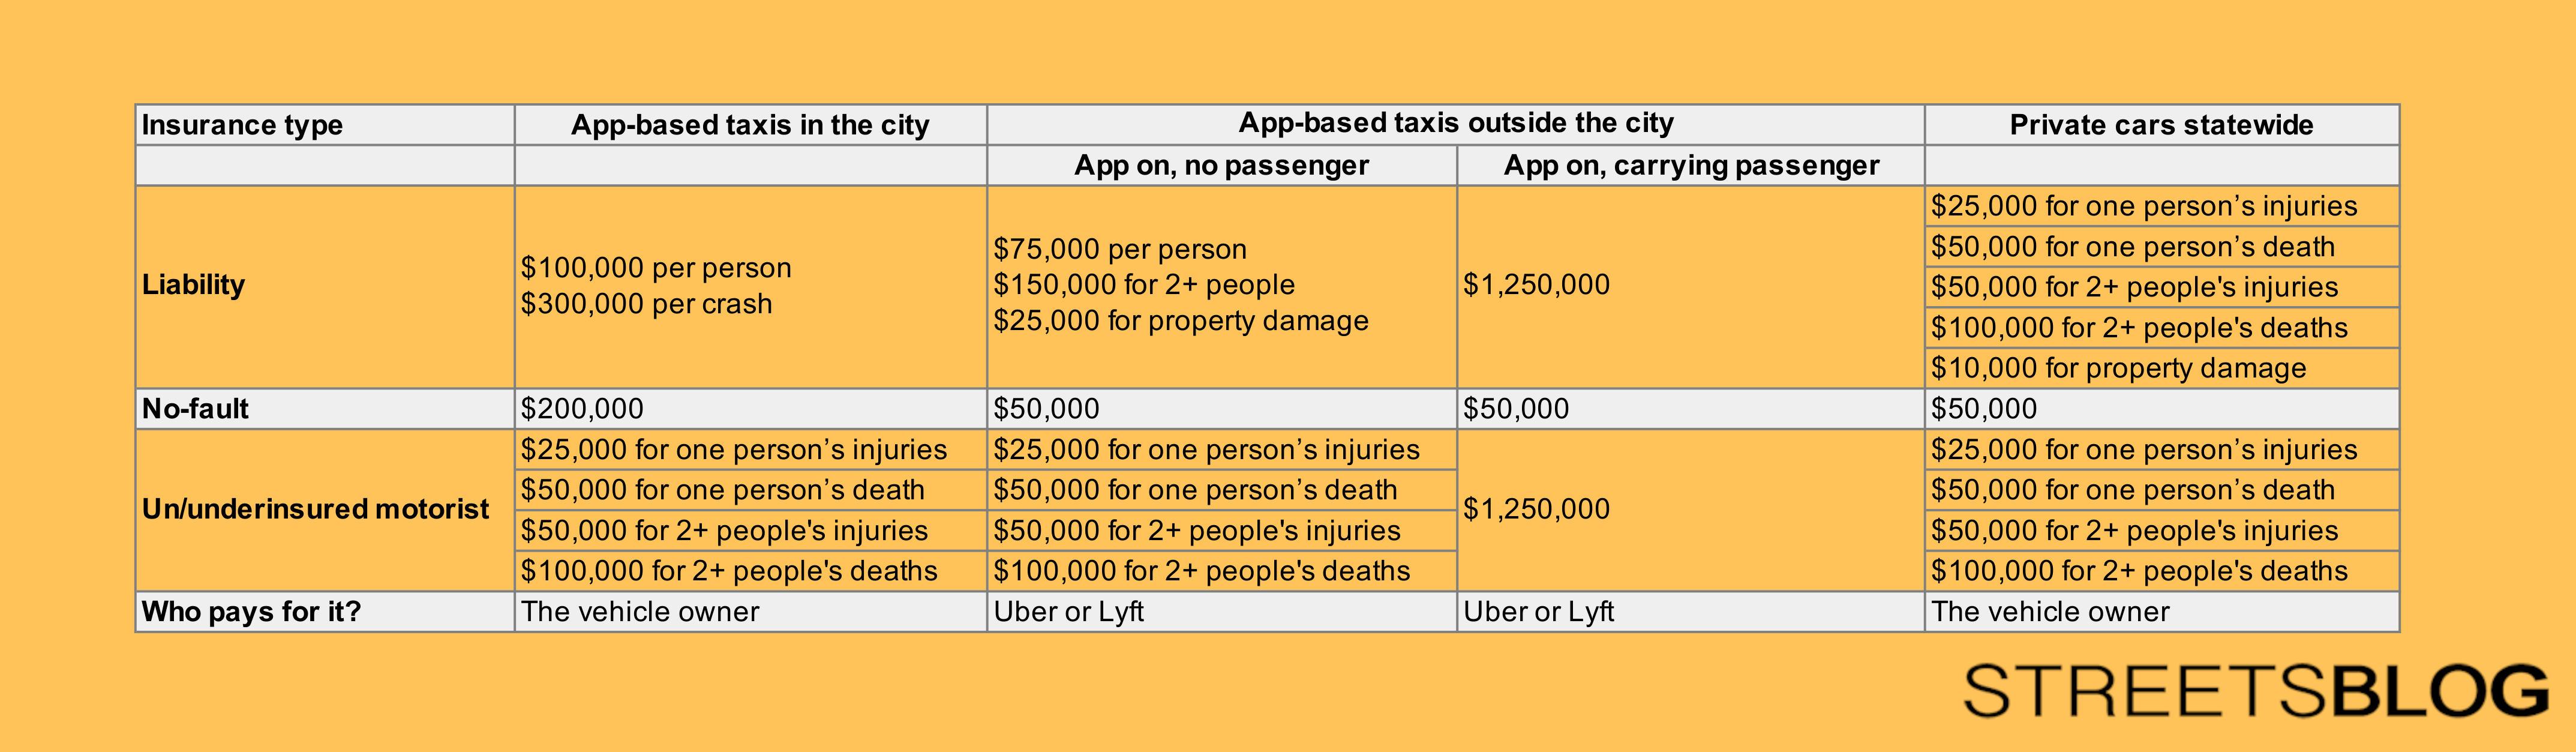 New York's Byzantine minimum auto insurance requirements for app-based taxis and private cars.